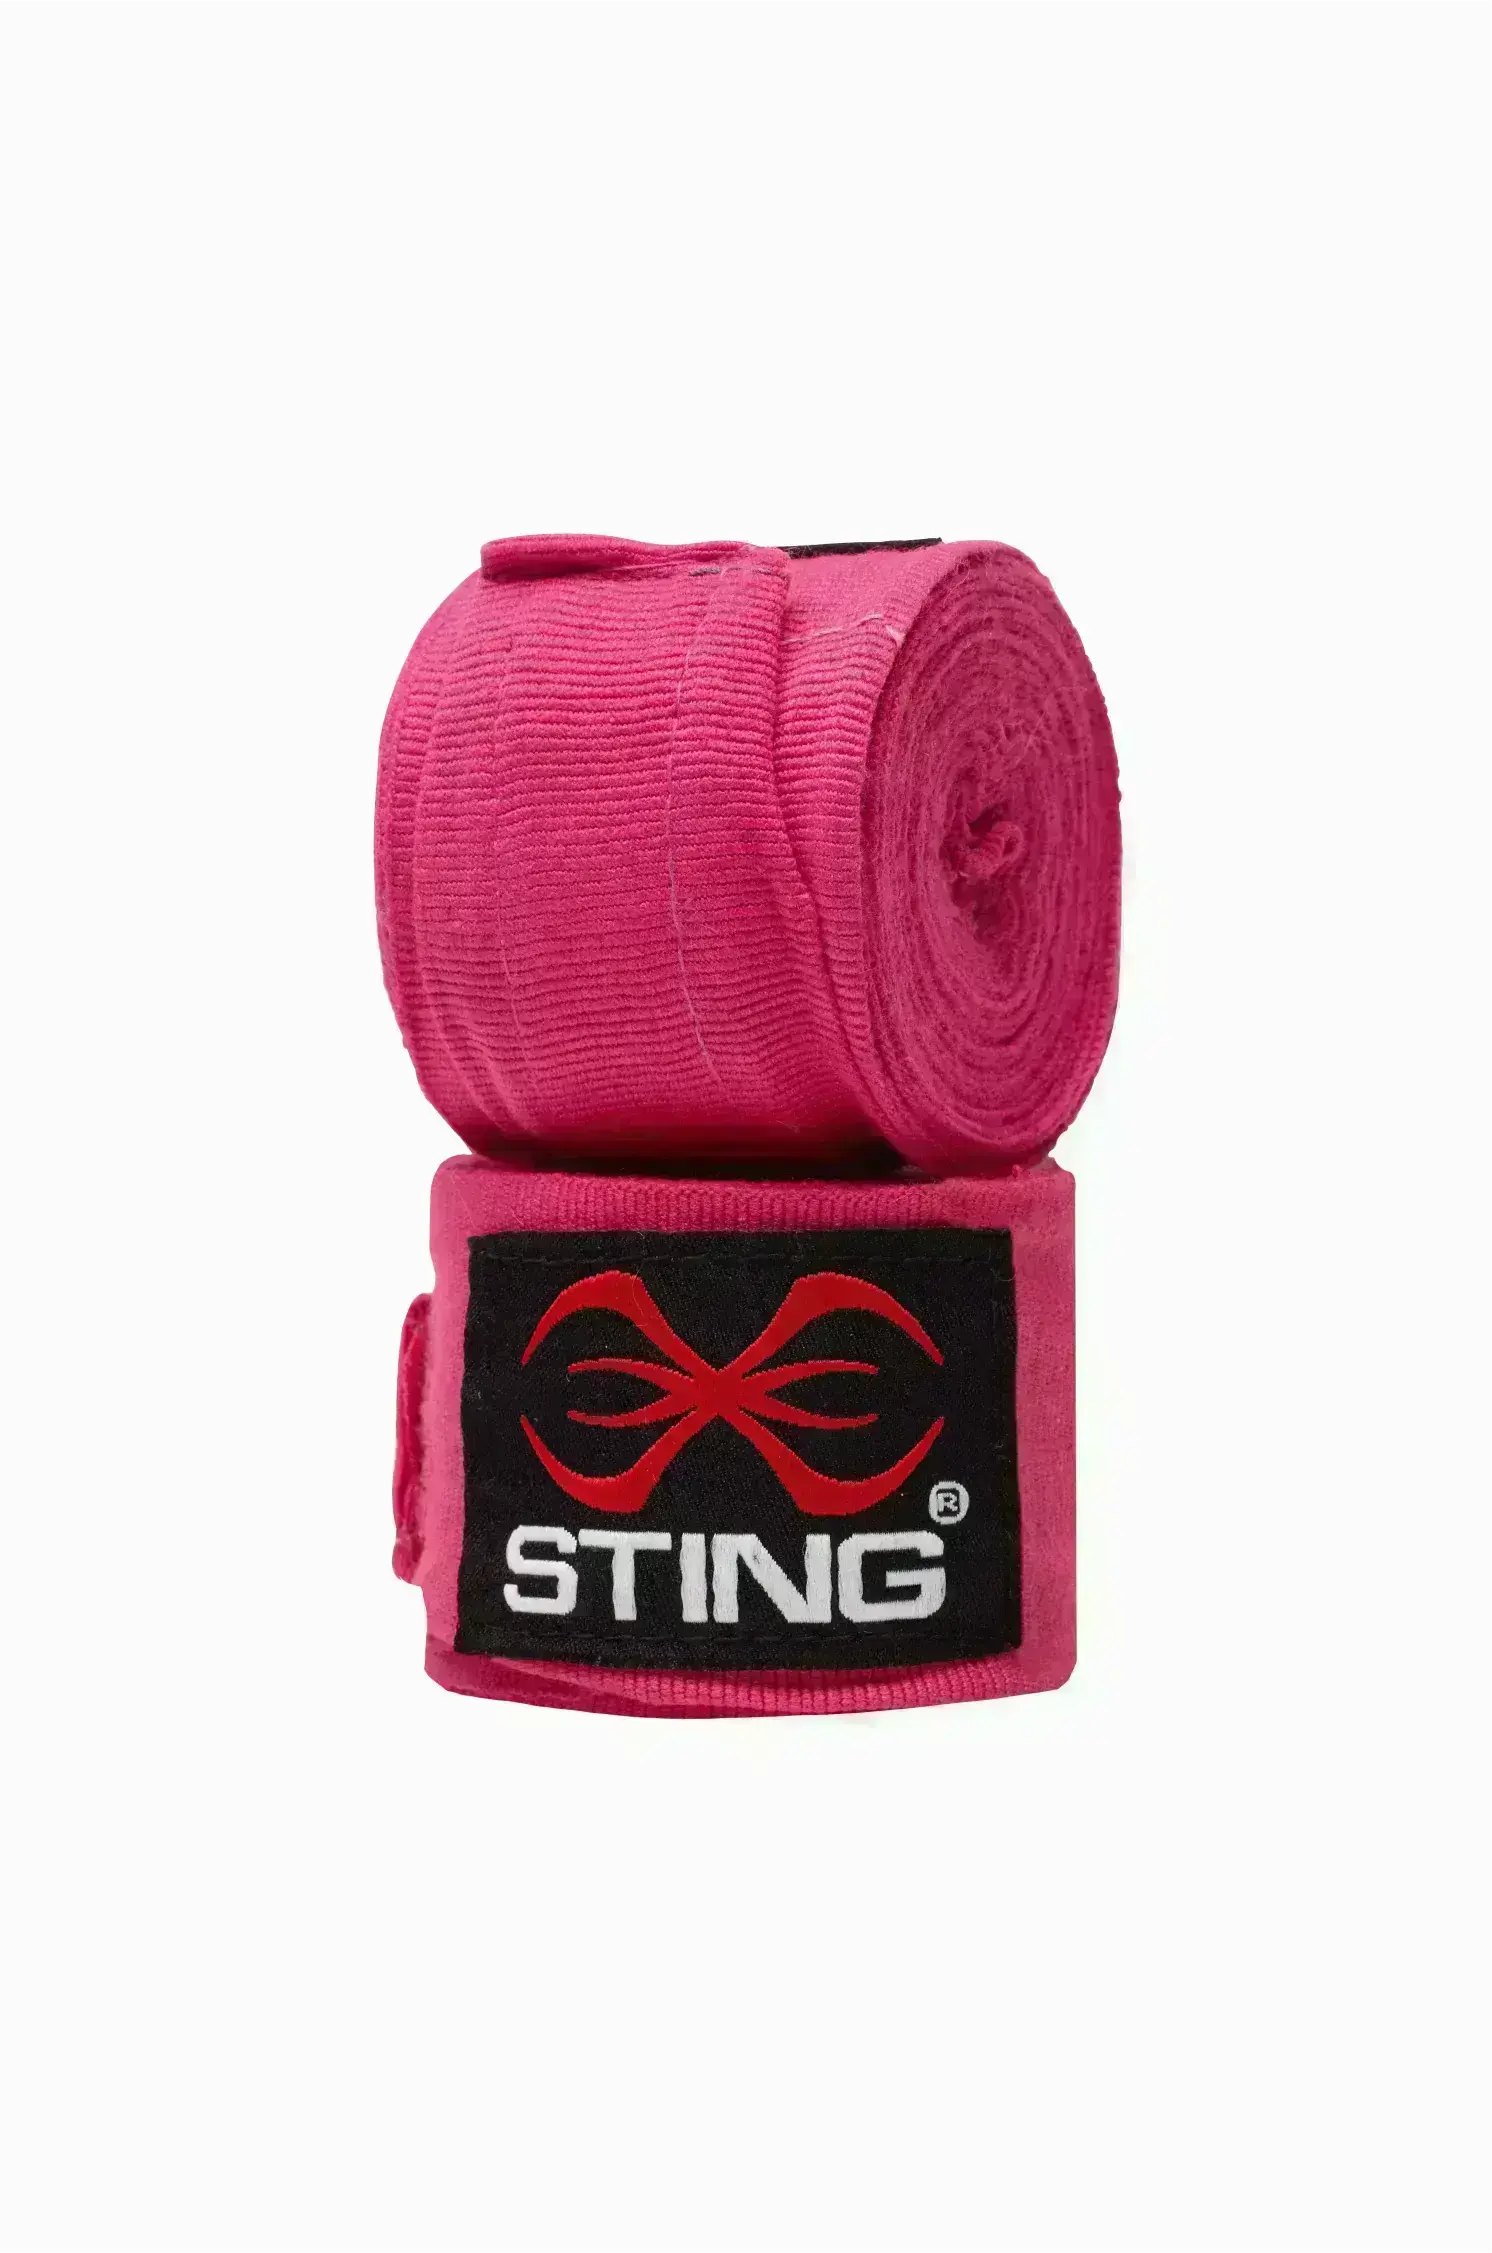 Sting Elasticicated Hand Wraps Pink-4.5m Fight Co